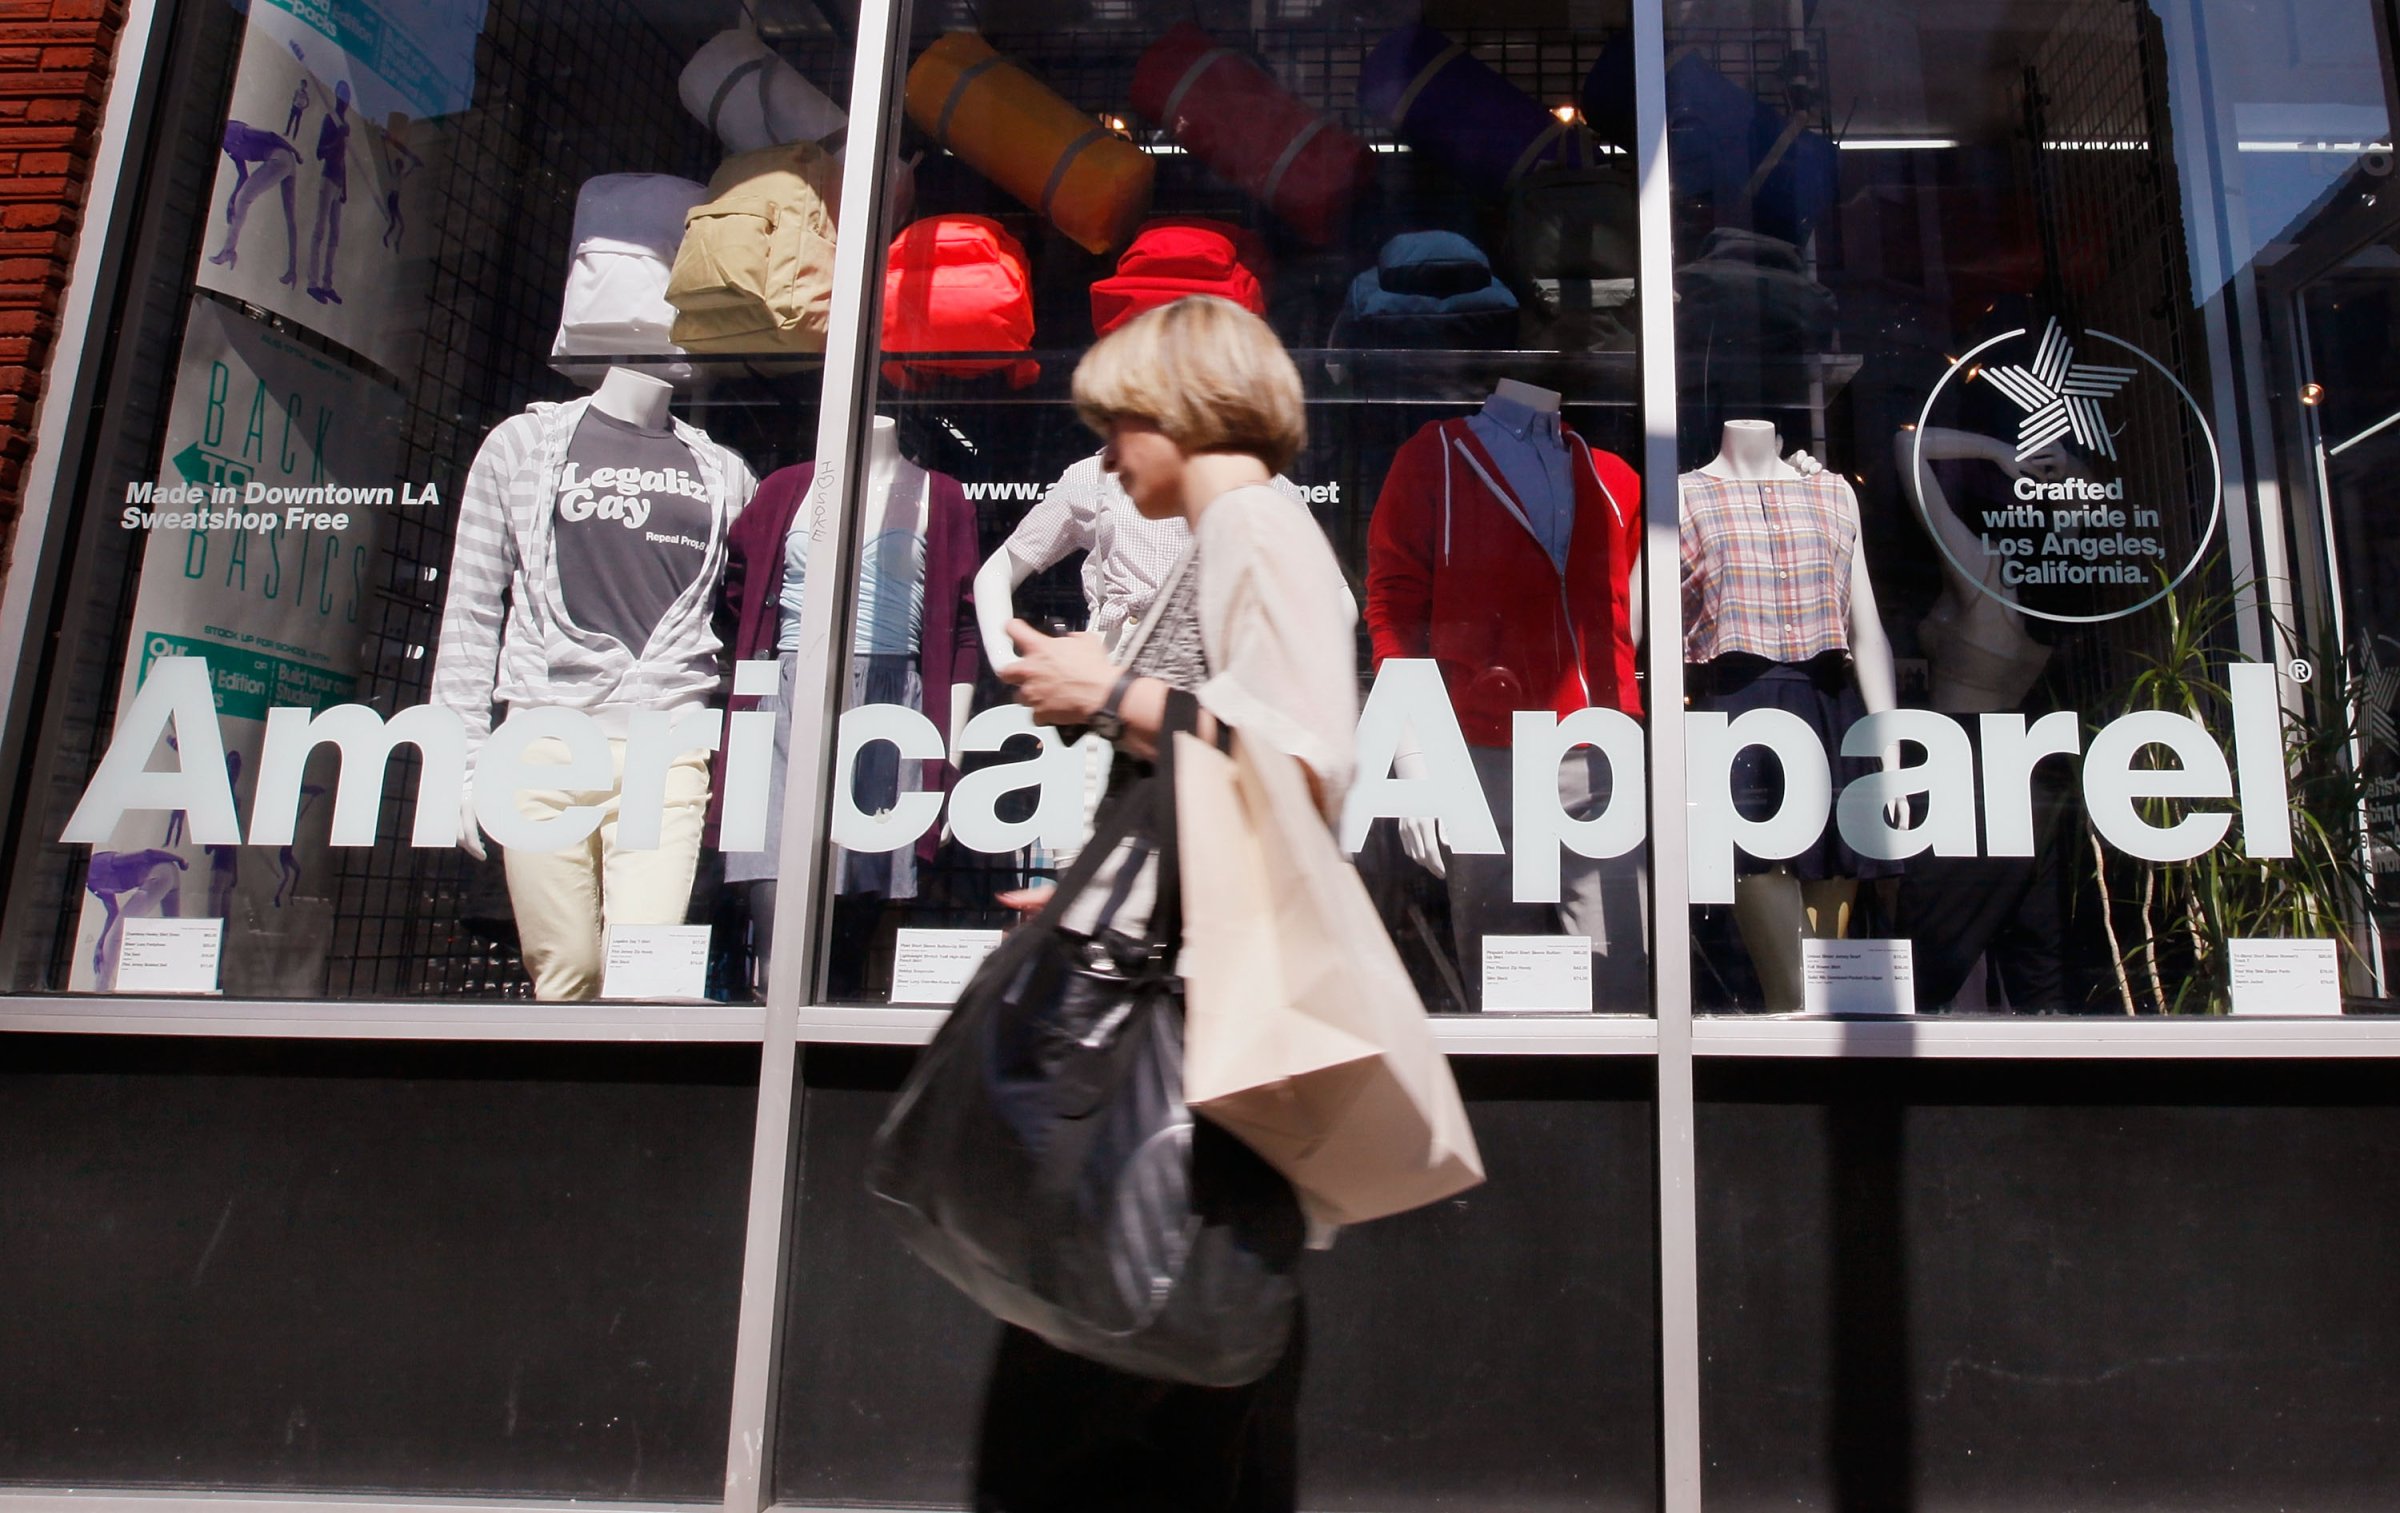 A pedestrian passes by an American Apparel store on Sept. 4, 2009 in Chicago, Illinois.